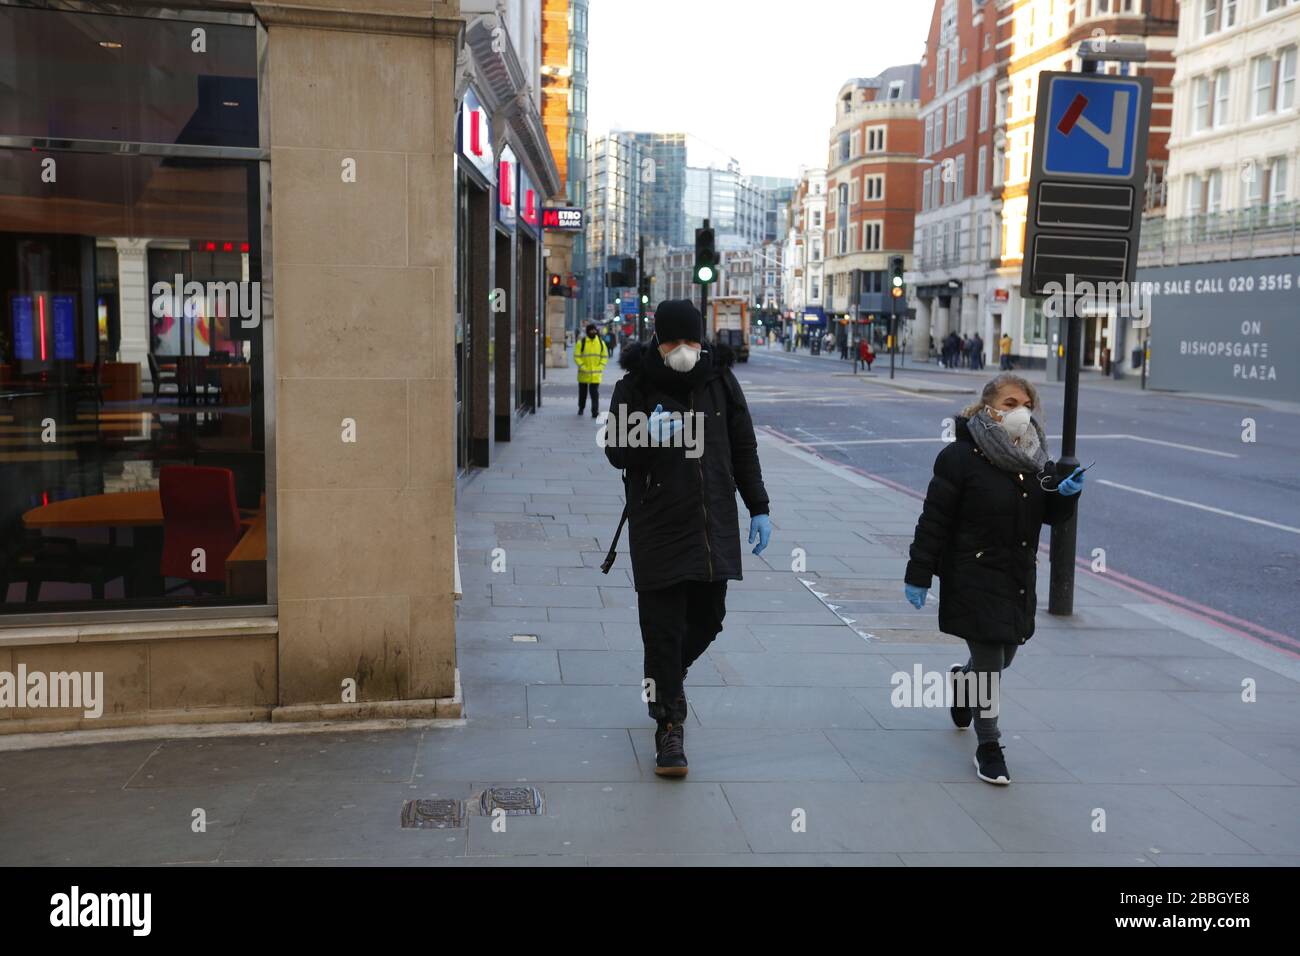 London, UK. 31st Mar, 2020. COVID-19 pandemic sunset near Bank of England and nearby with streets nearly empty or empty. Credit: AM24/Alamy Live News Stock Photo